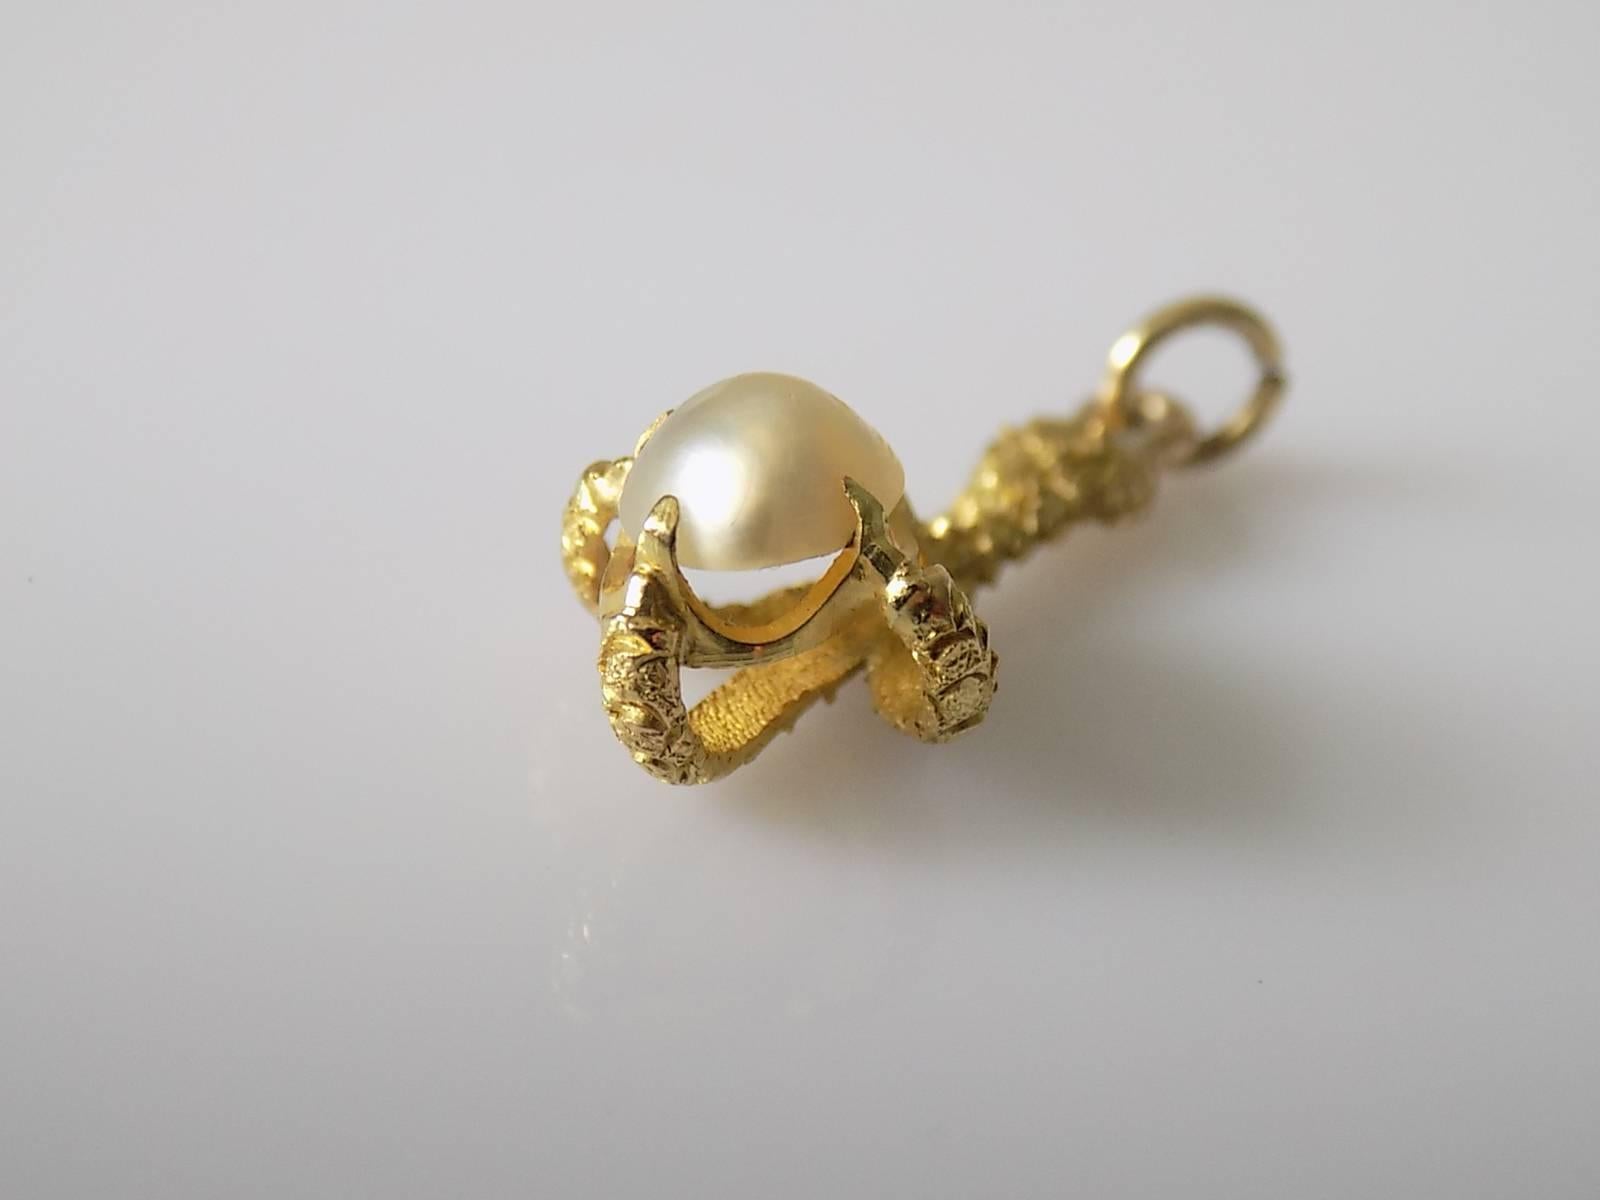 A highly detailed Antique c.1890 French 18 Carat Gold and Natural half Pearl Claw pendant / charm.
Total drop including jump rings 25mm (1